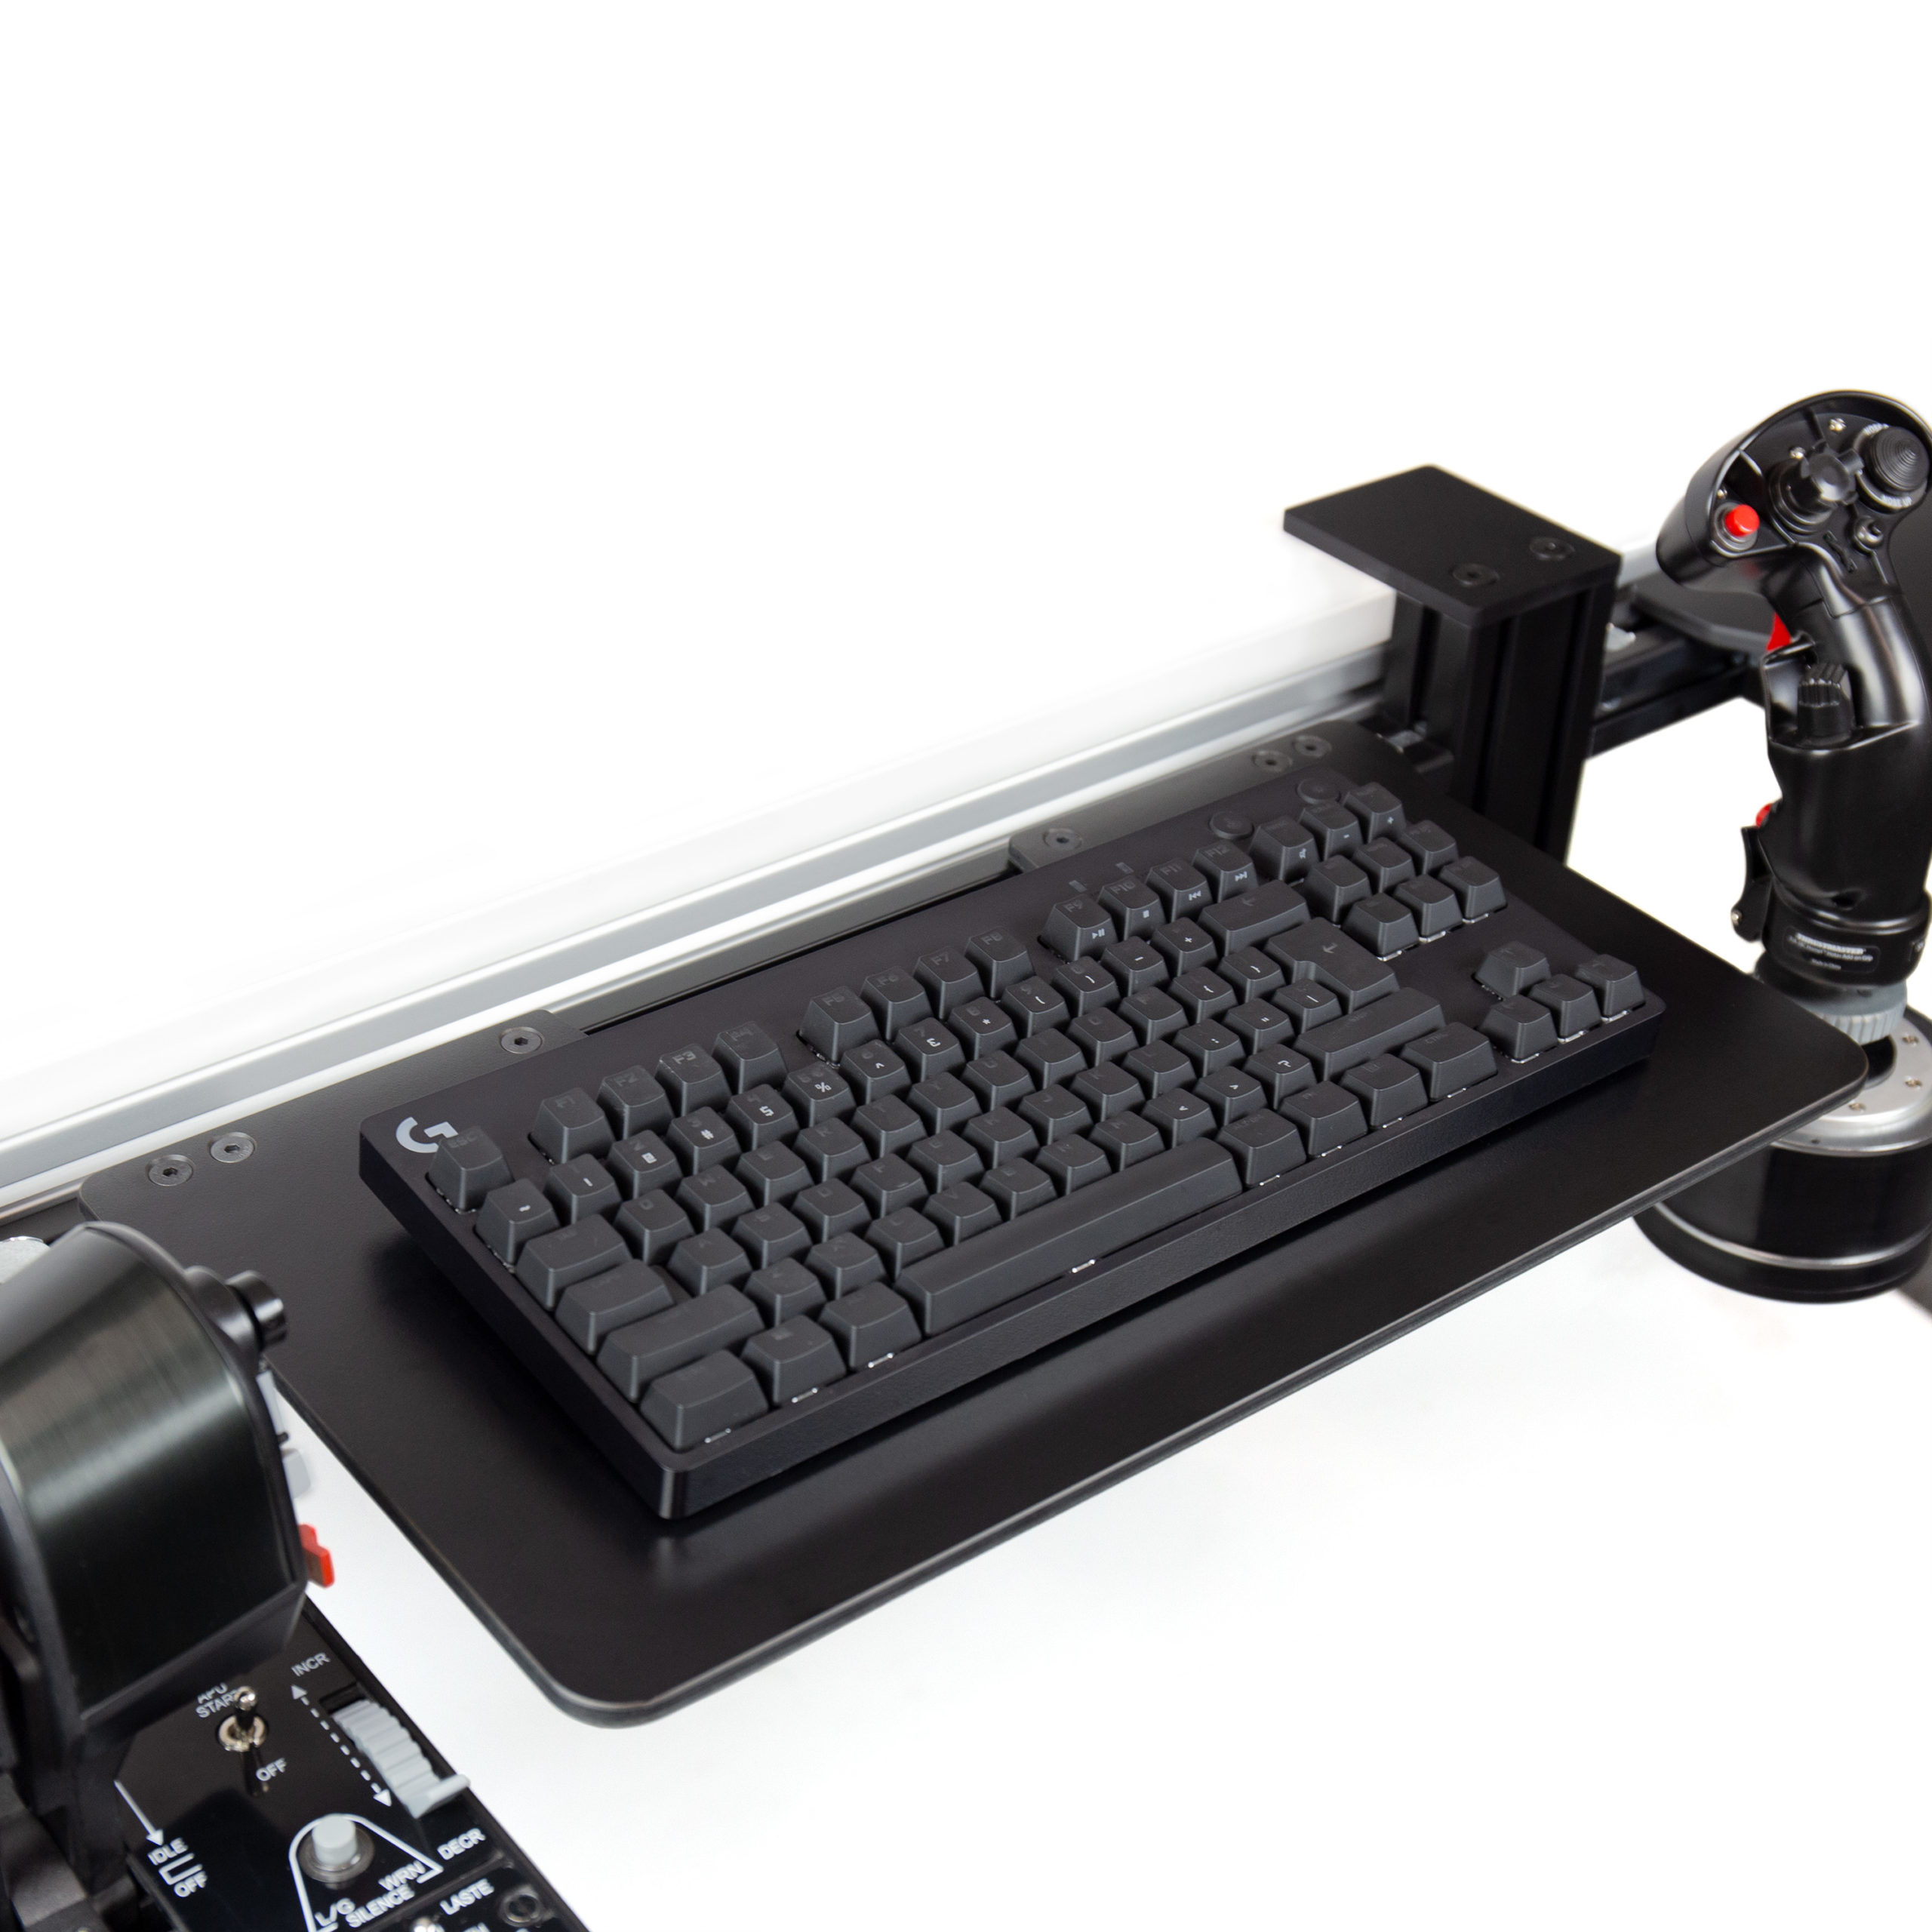 Ergonomic laptop/keyboard/mouse stand/mount/holder for chair